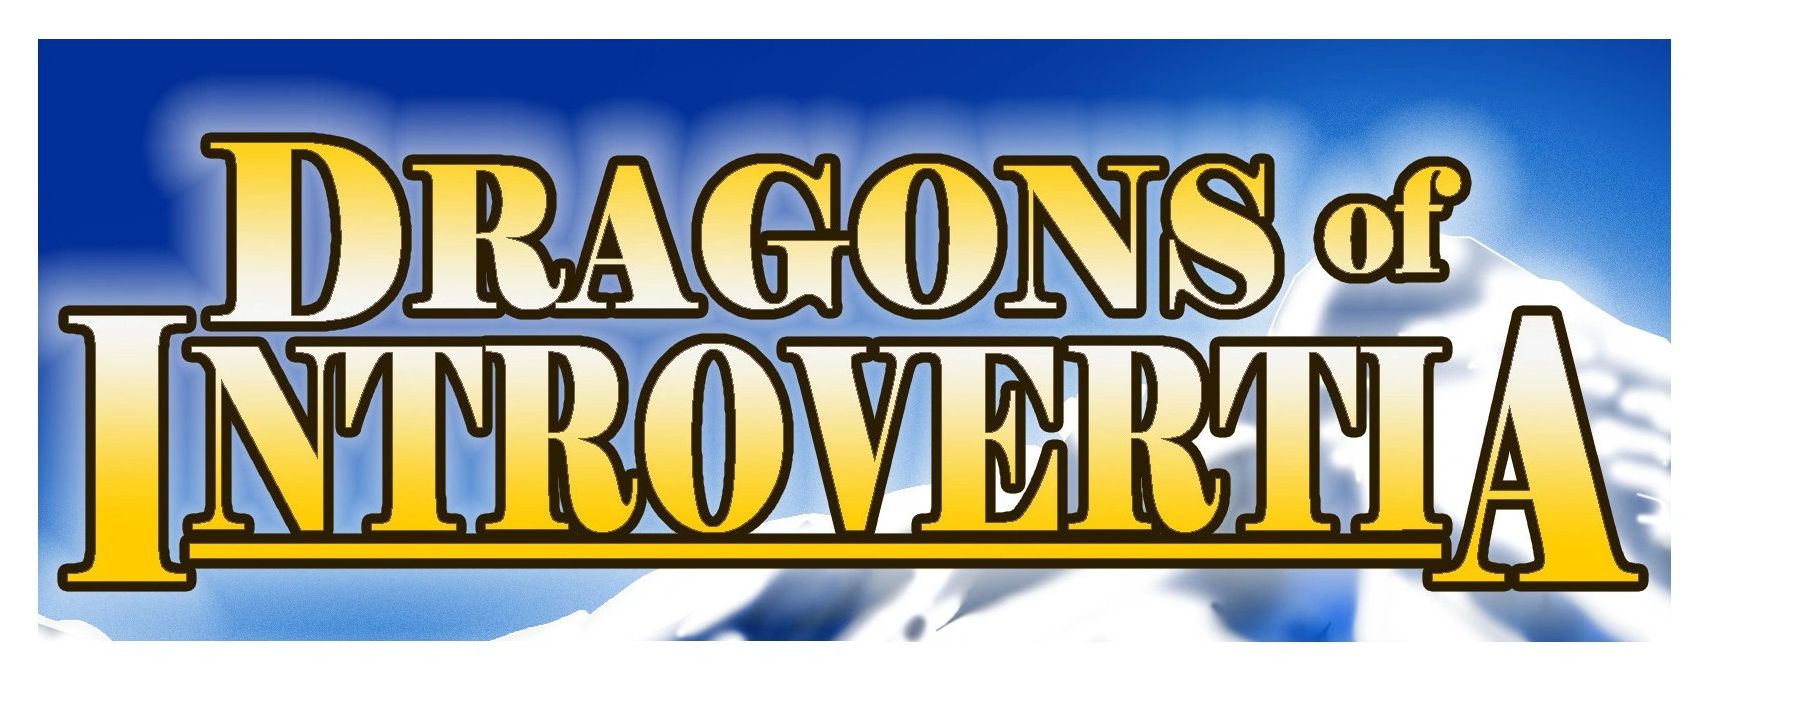 Dragons of Introvertia